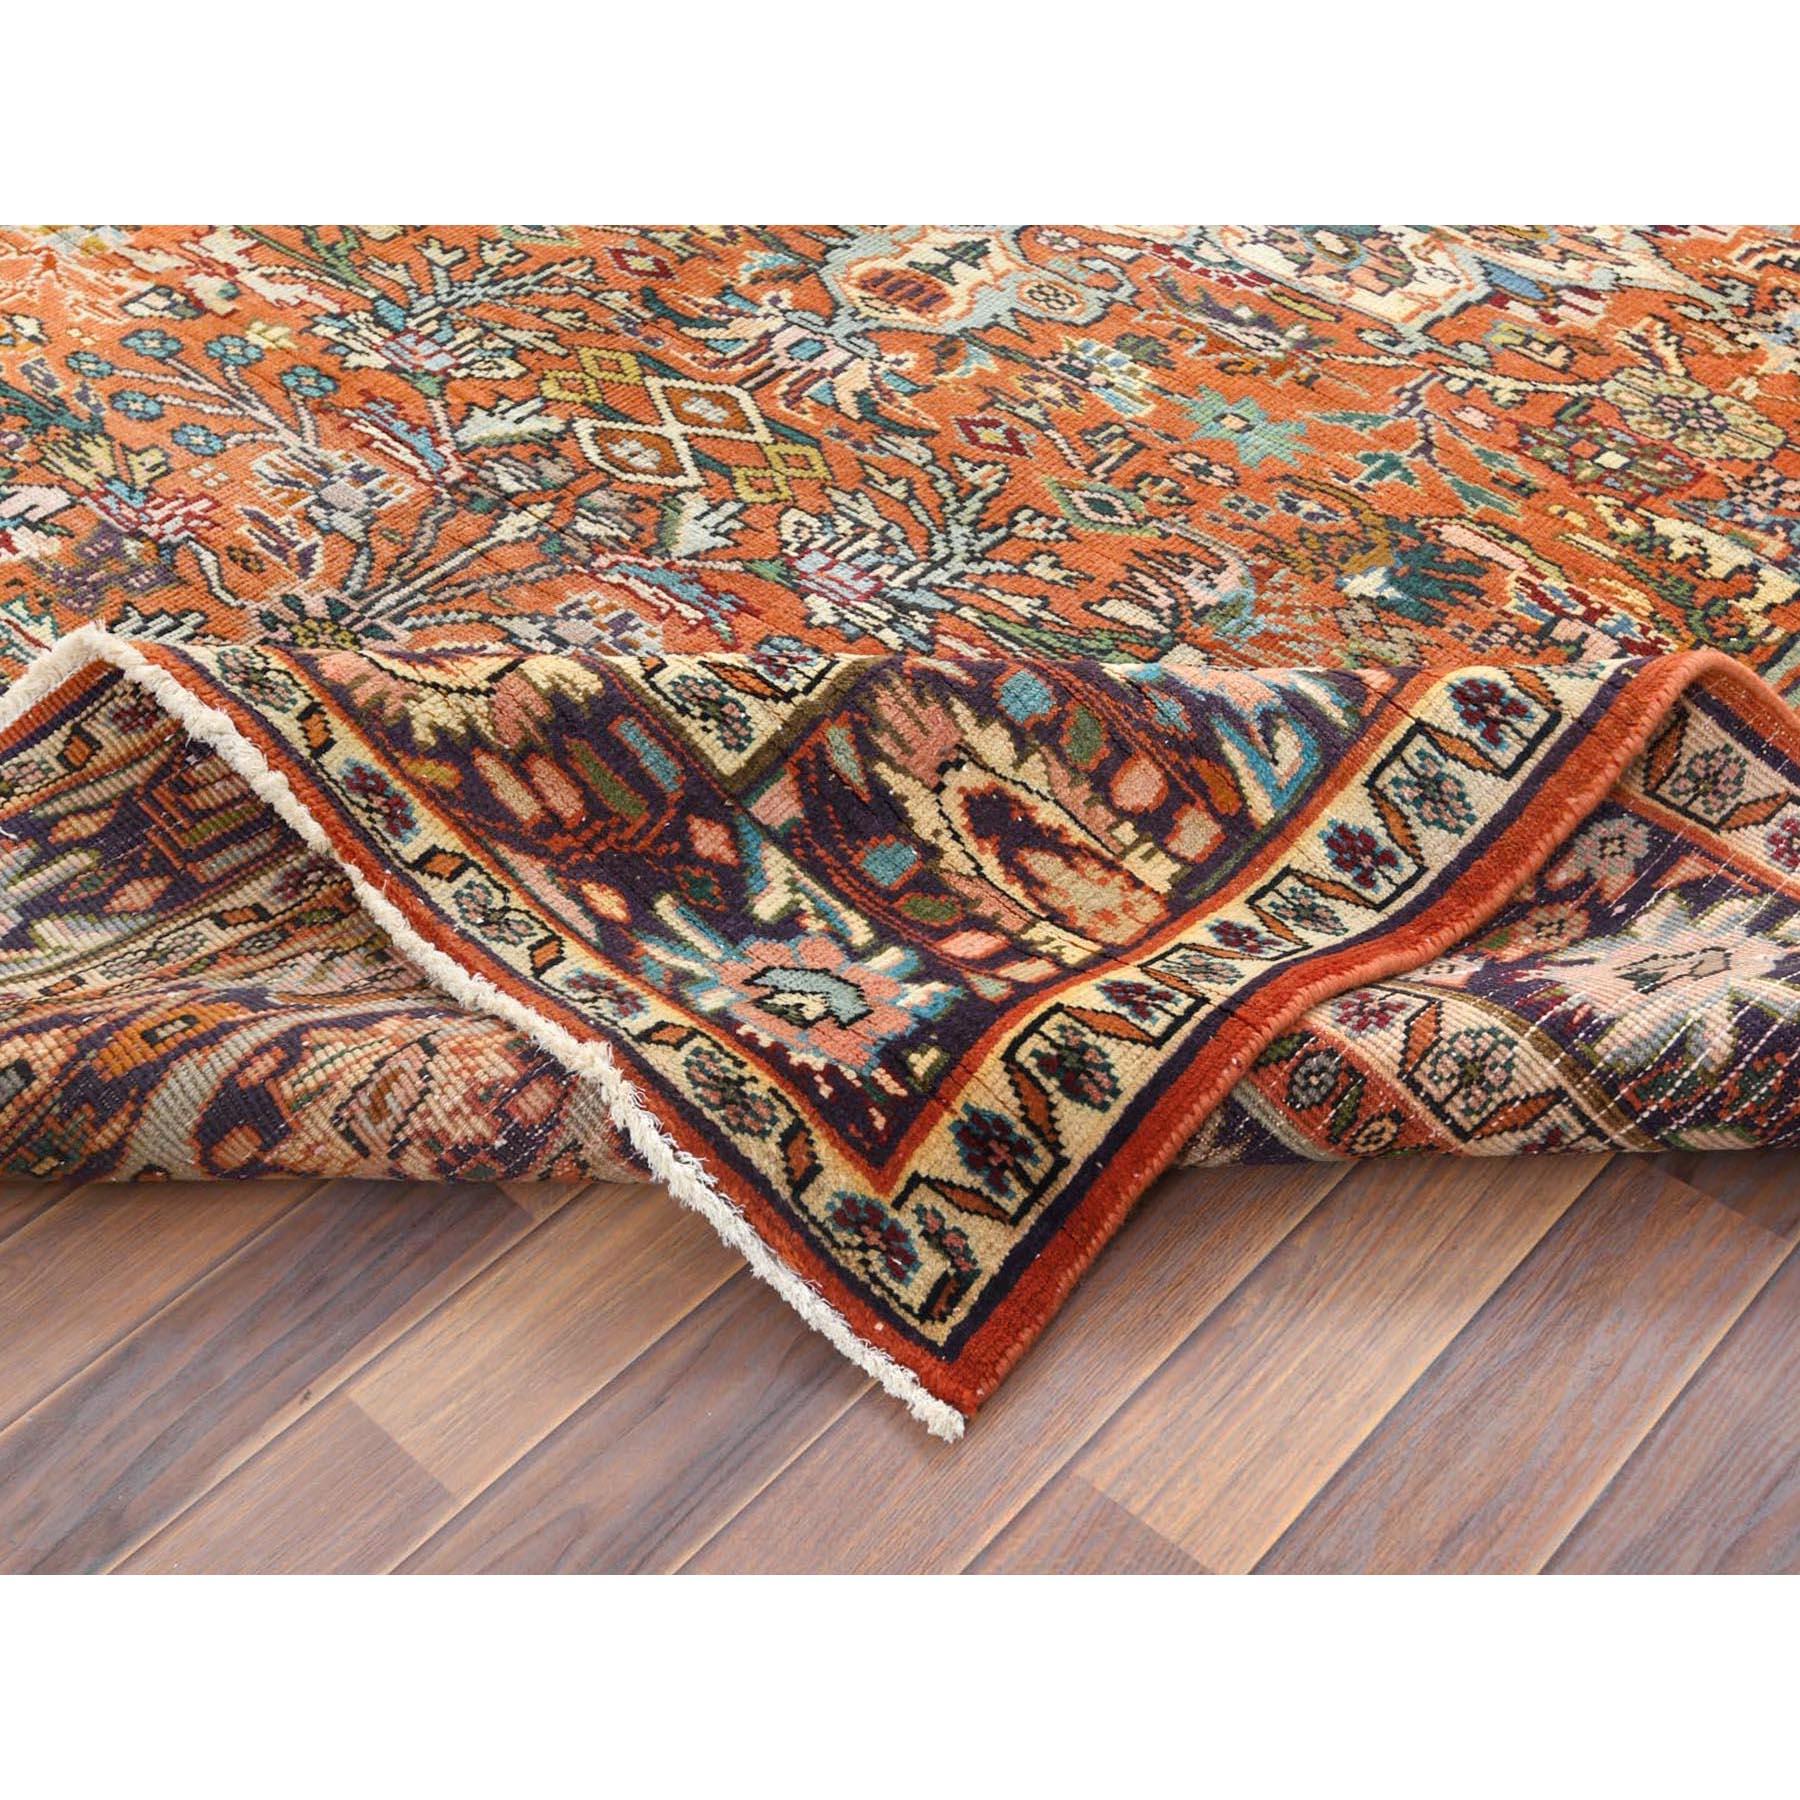 Sunset Color Shades Hand Knotted Vintage Persian Heriz, Distressed Worn Wool Rug 1